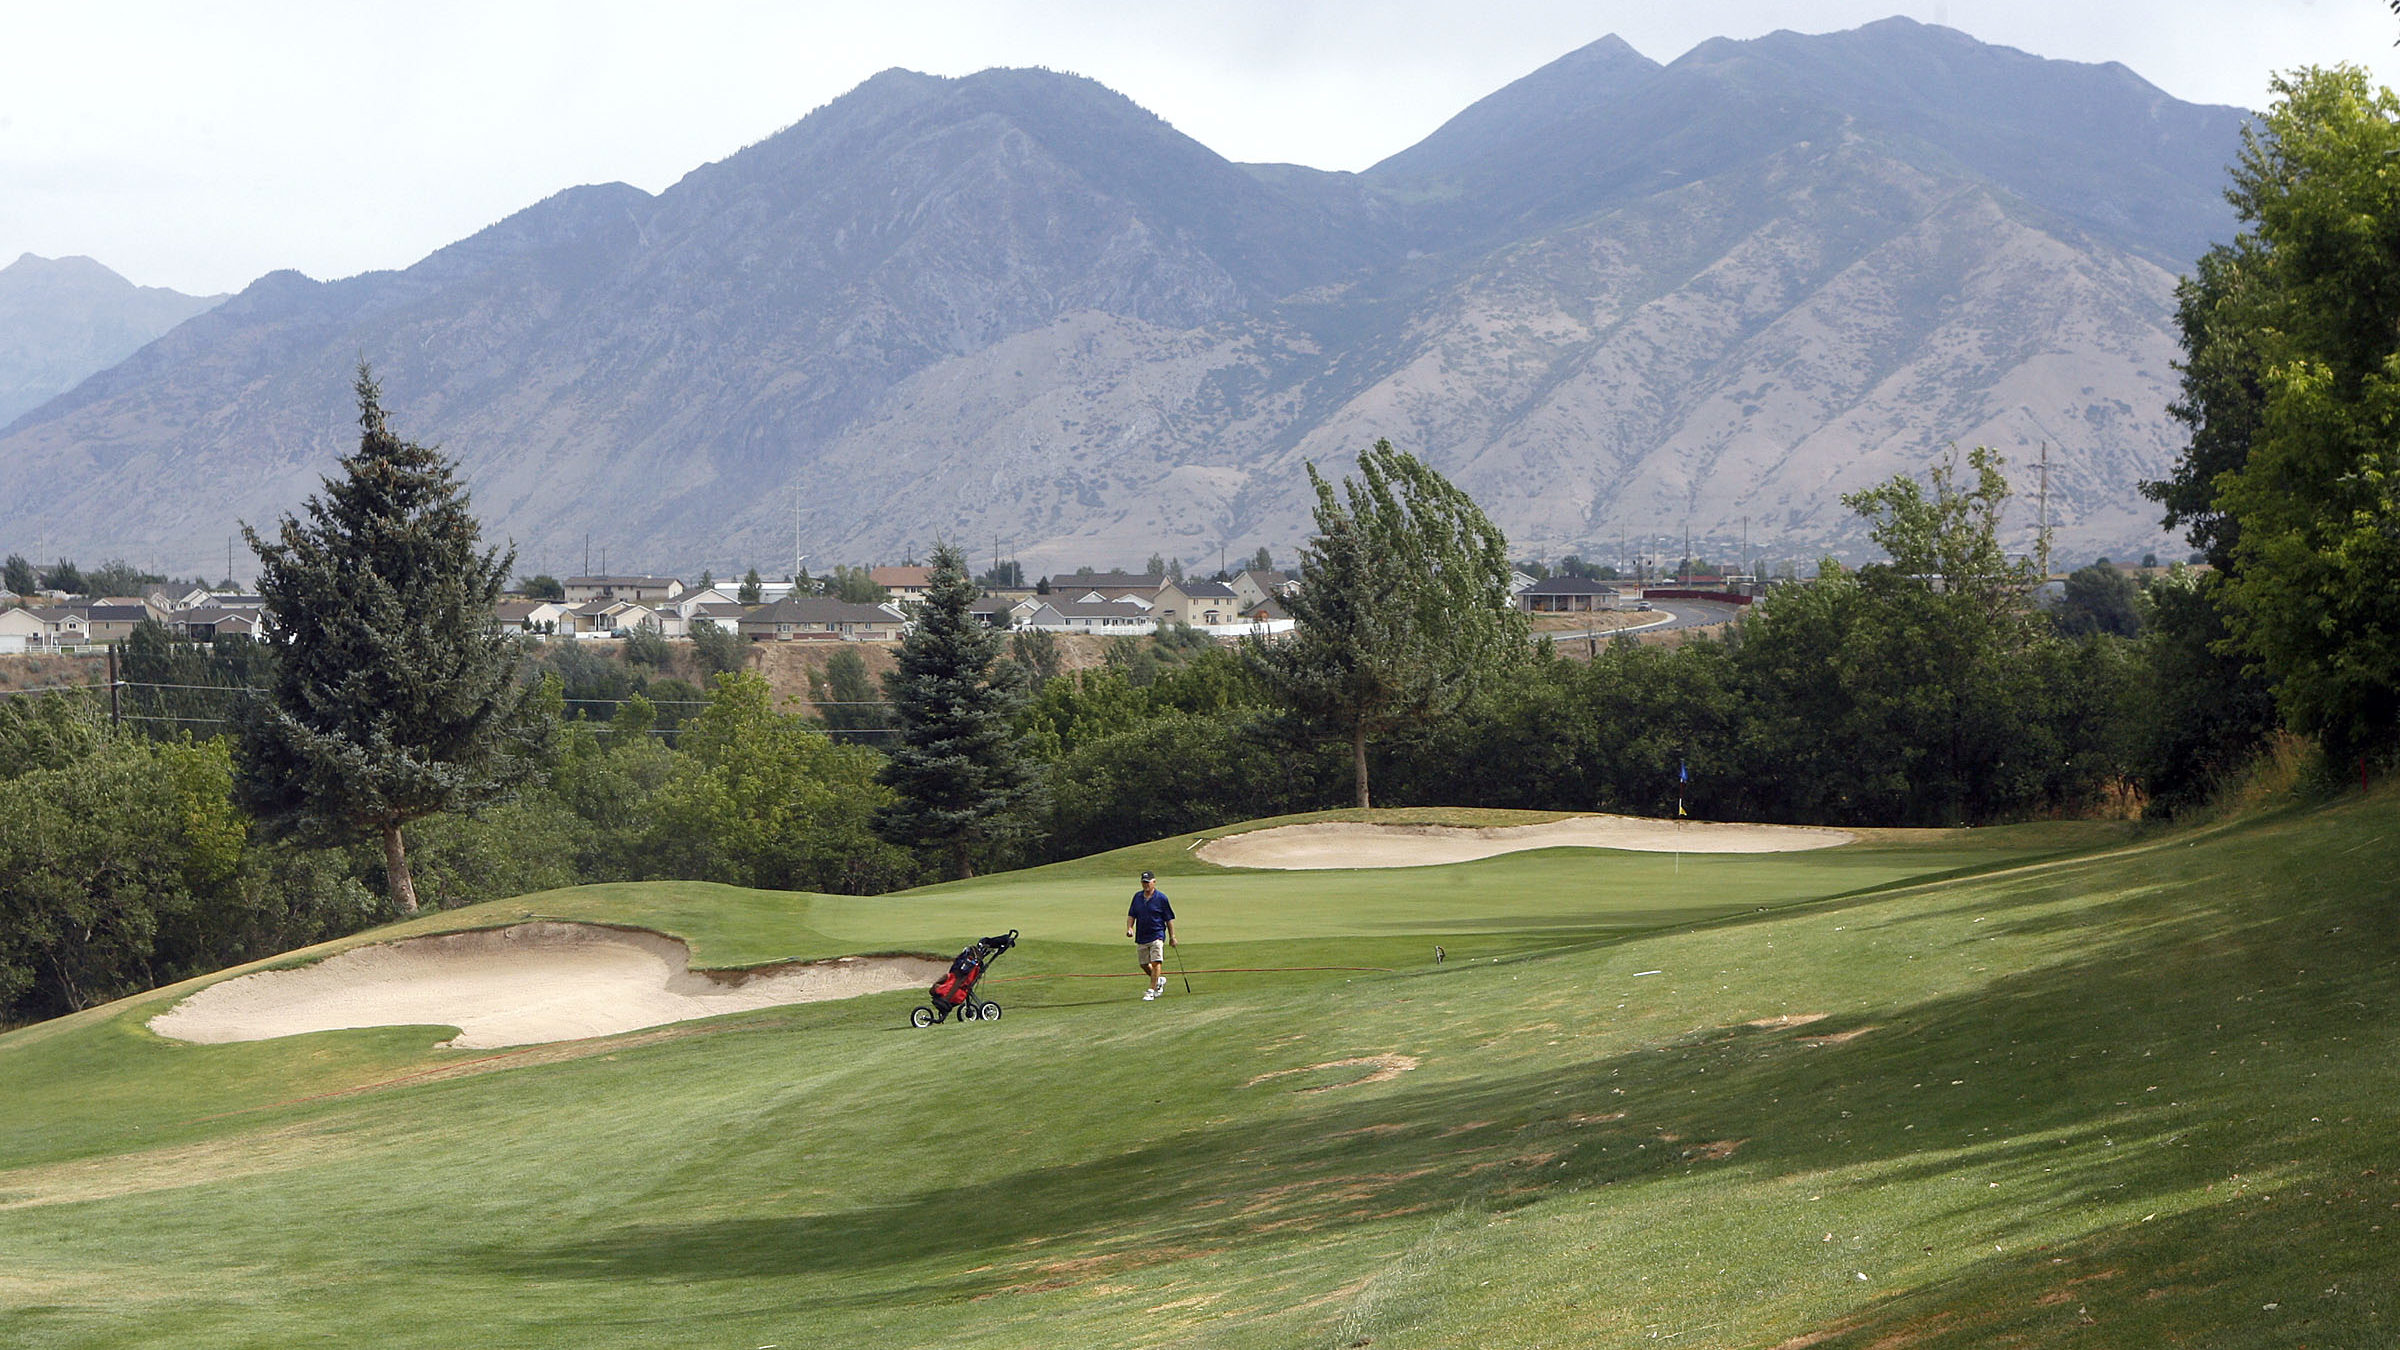 golf course in Spanish Fork. Amid the drought it went through an update...